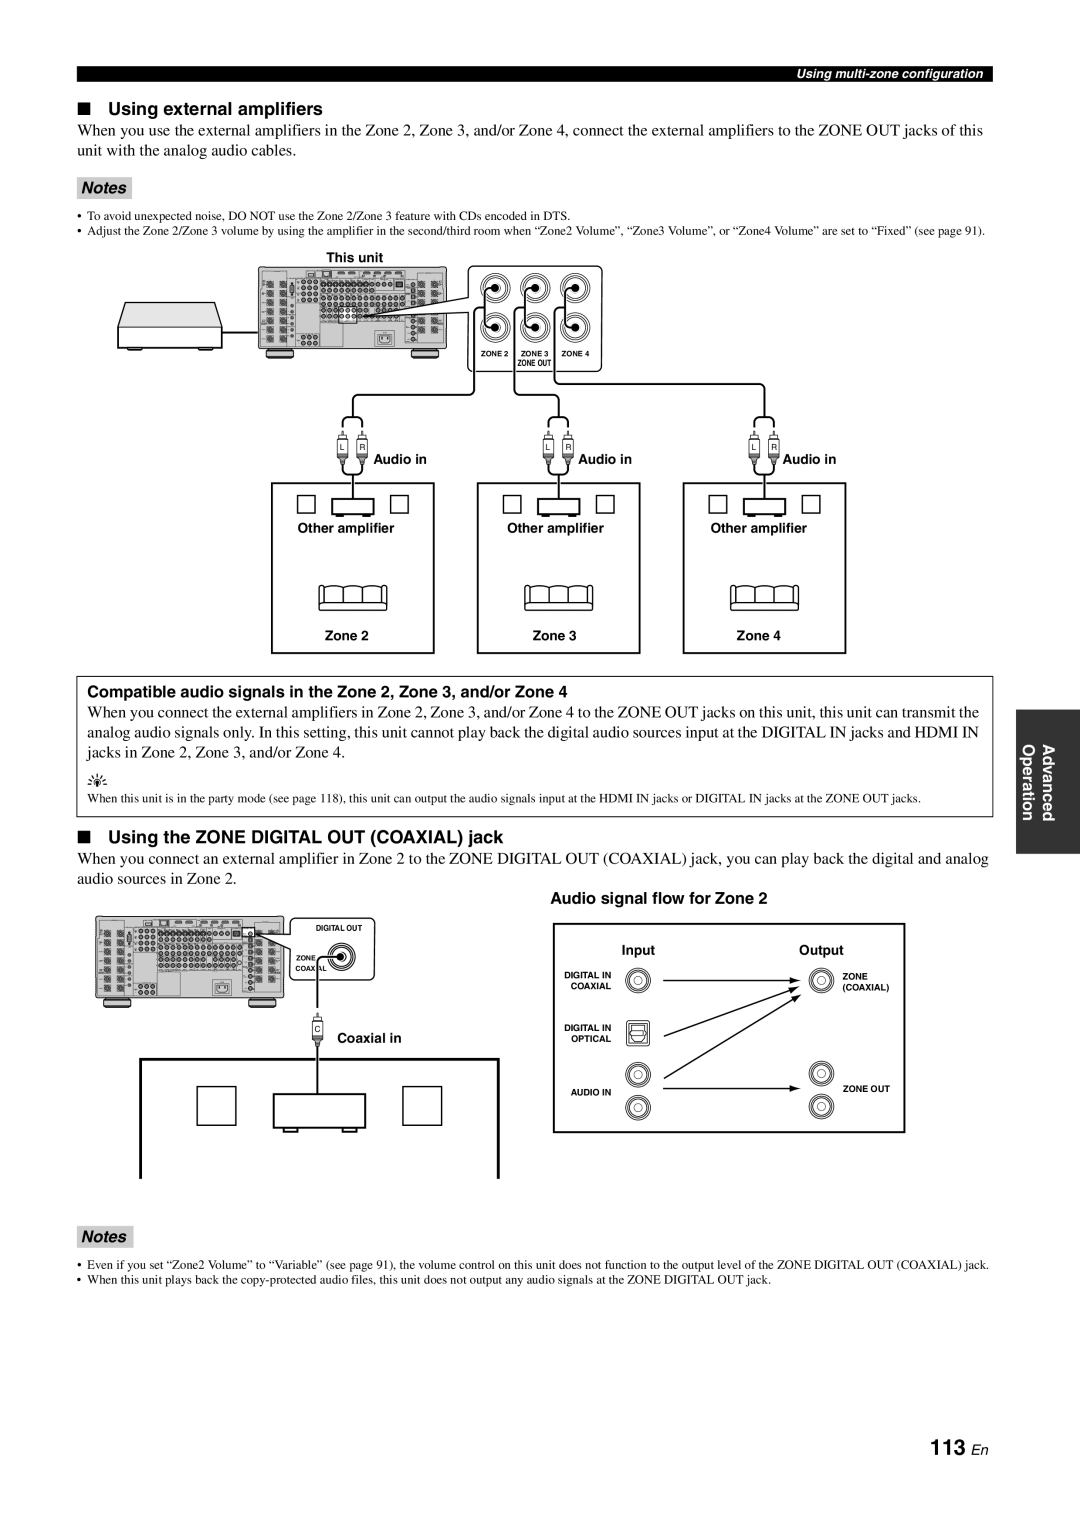 Yamaha DSP-Z11 113 En, Using external amplifiers, Using the ZONE DIGITAL OUT COAXIAL jack, Notes, Operation, Advanced 